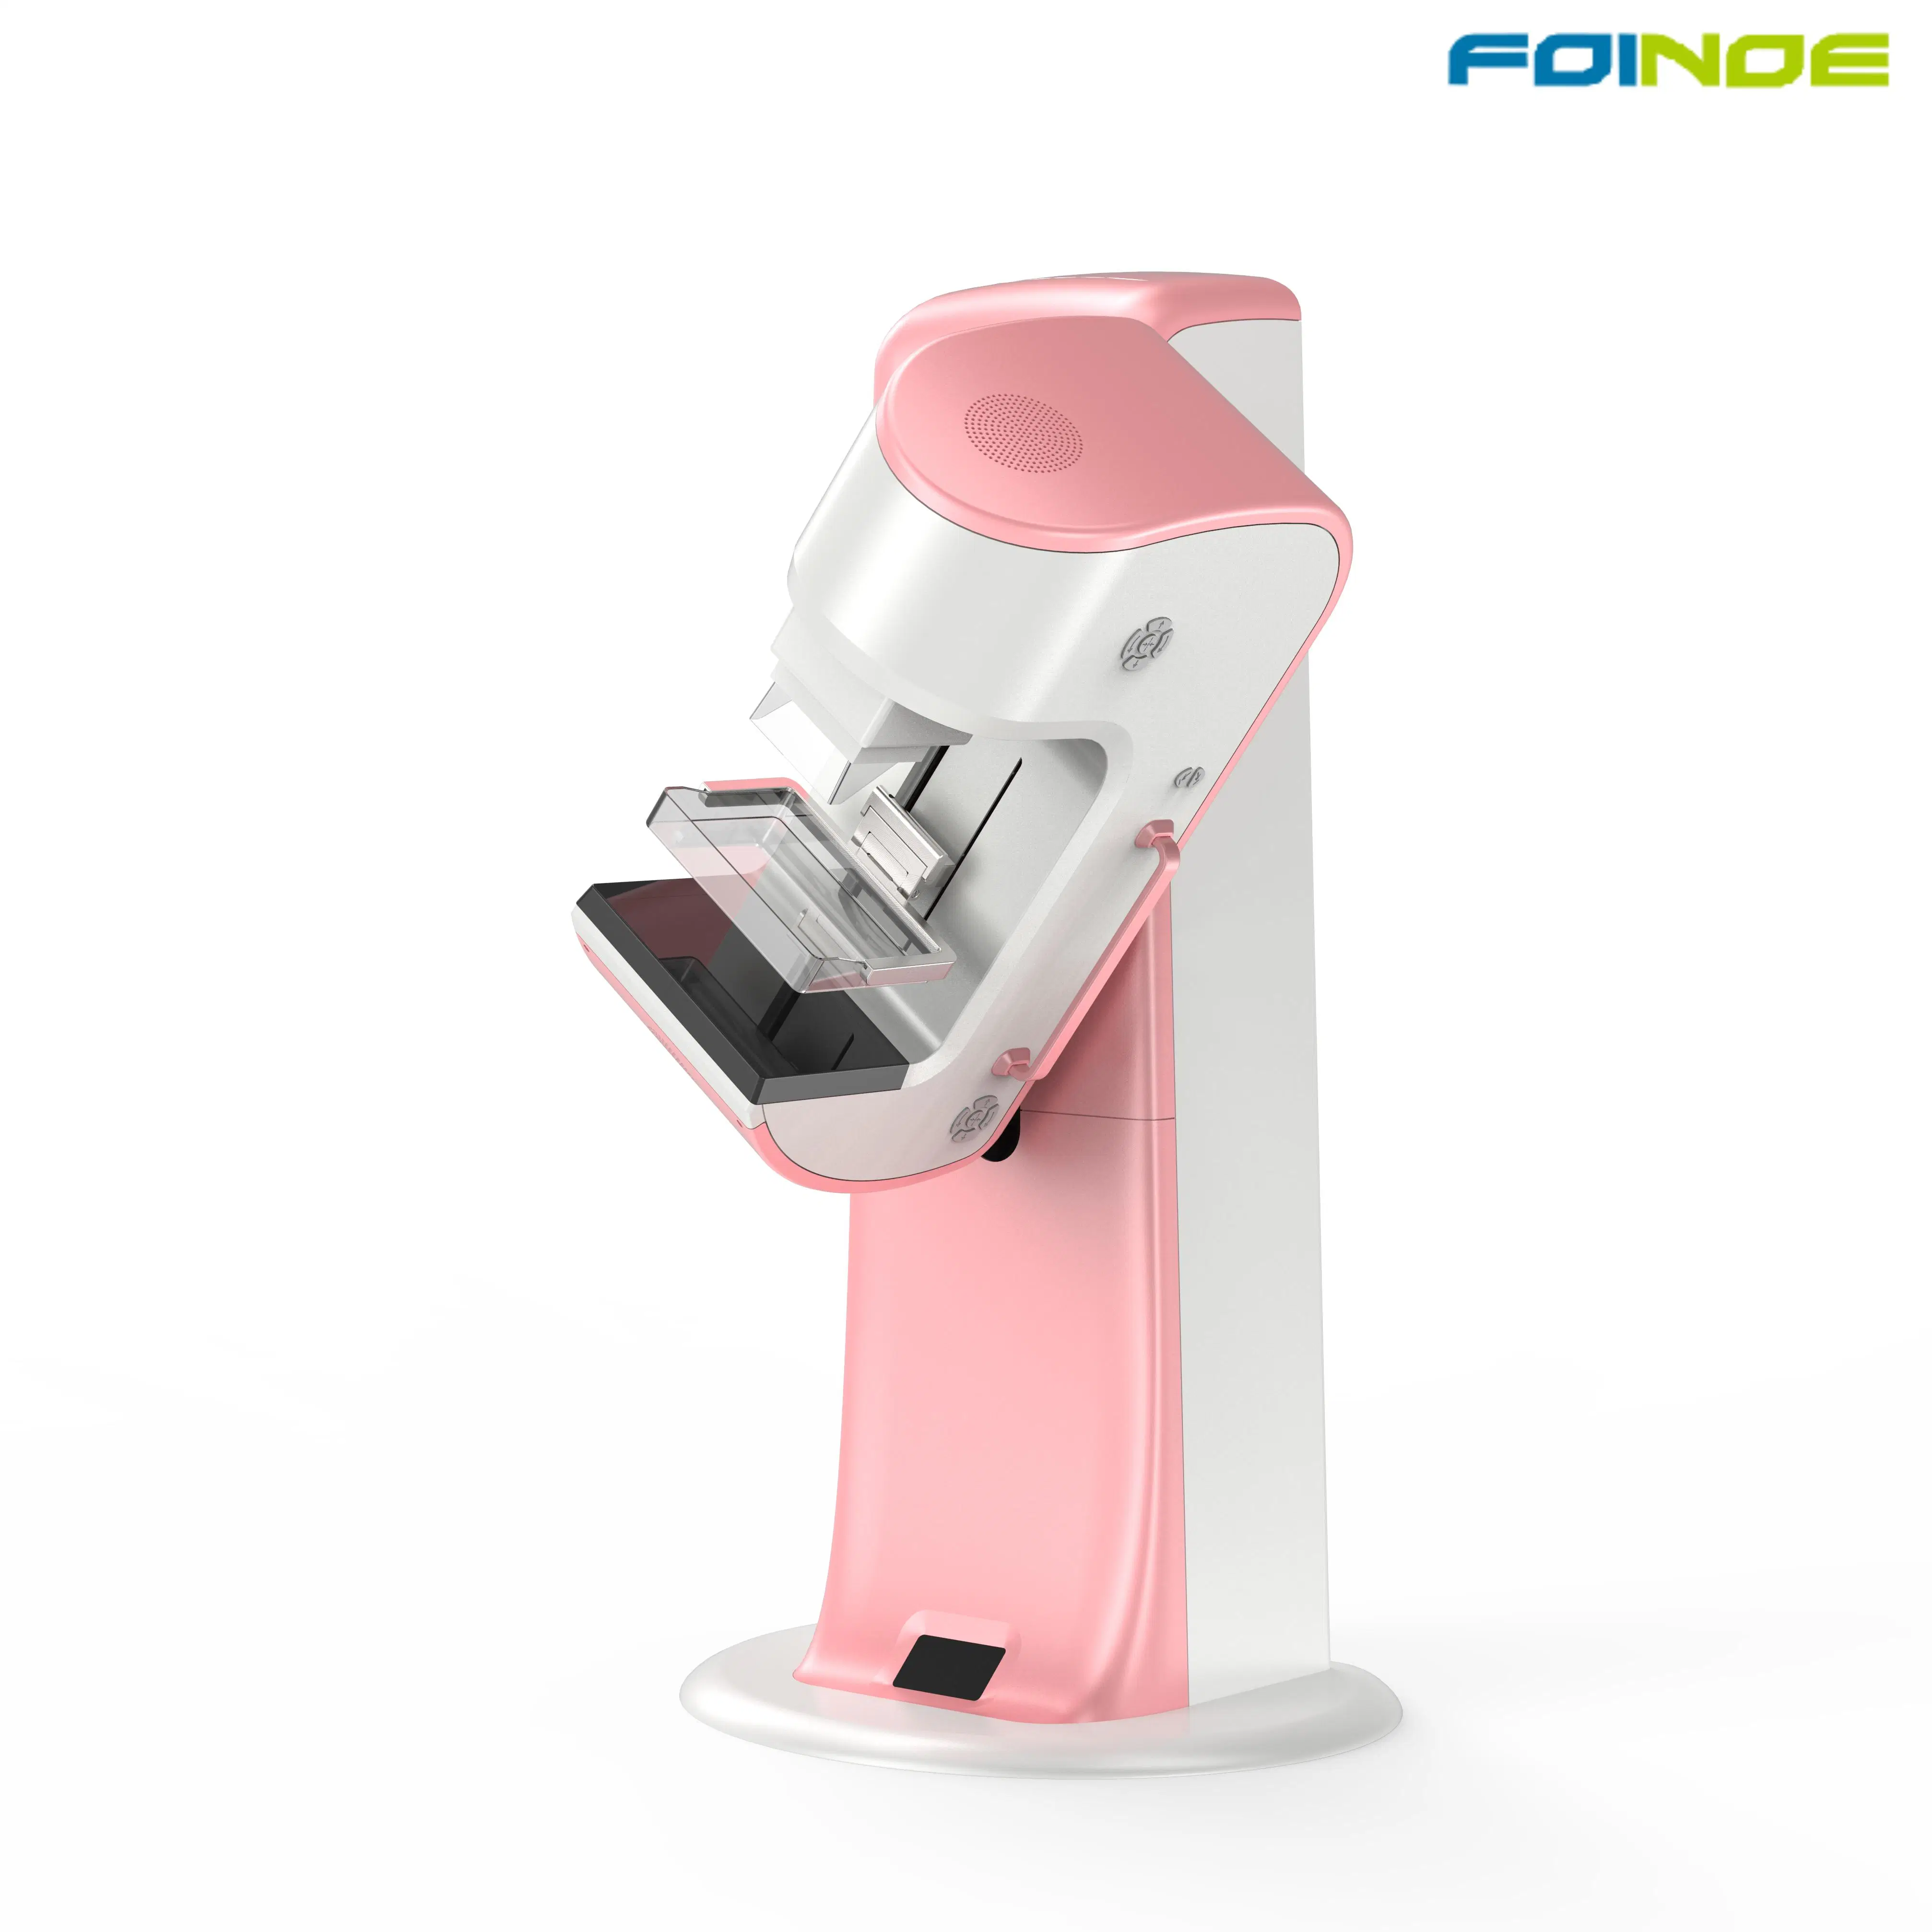 X Ray Mammography Machine Price Digital Foinoe Mobile Dr X-ray Machine with Image Gynecologist Mammography Examination